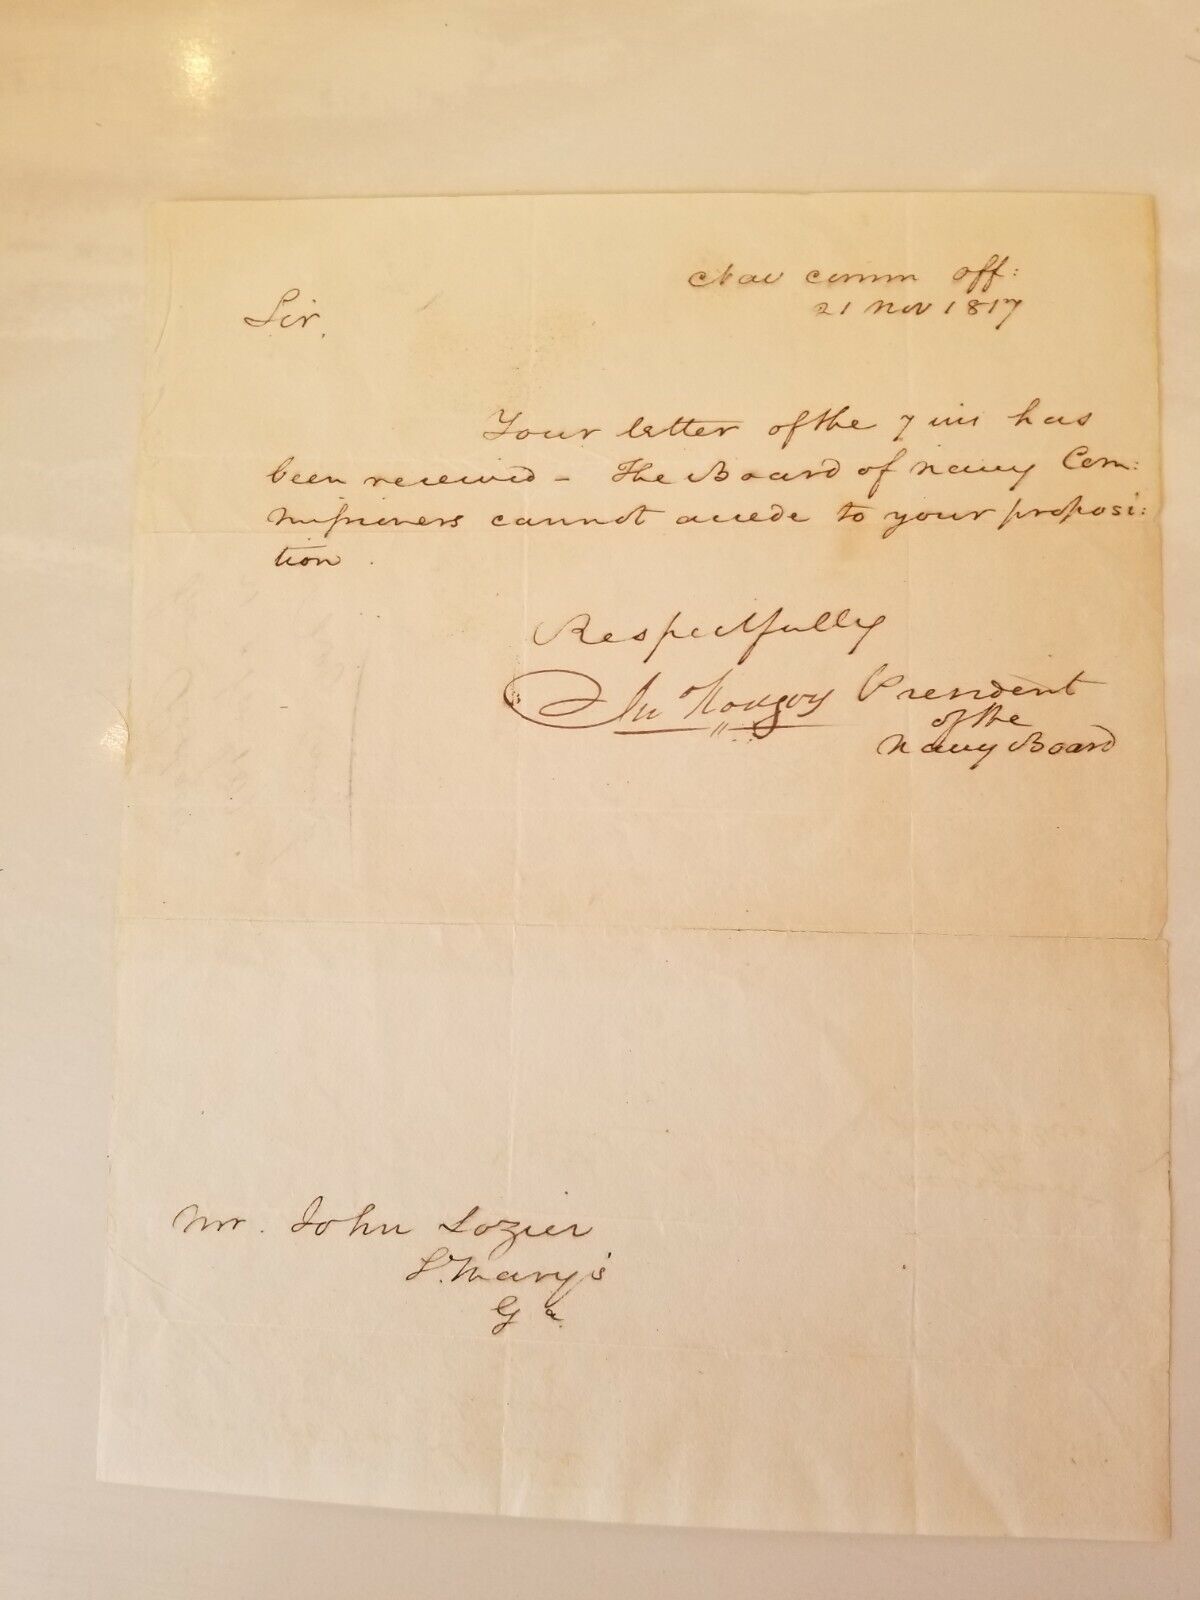 Rare Signed BARBARY WAR OF 1812 HERO US NAVY COMMODORE JOHN RODGERS 1817 LETTER